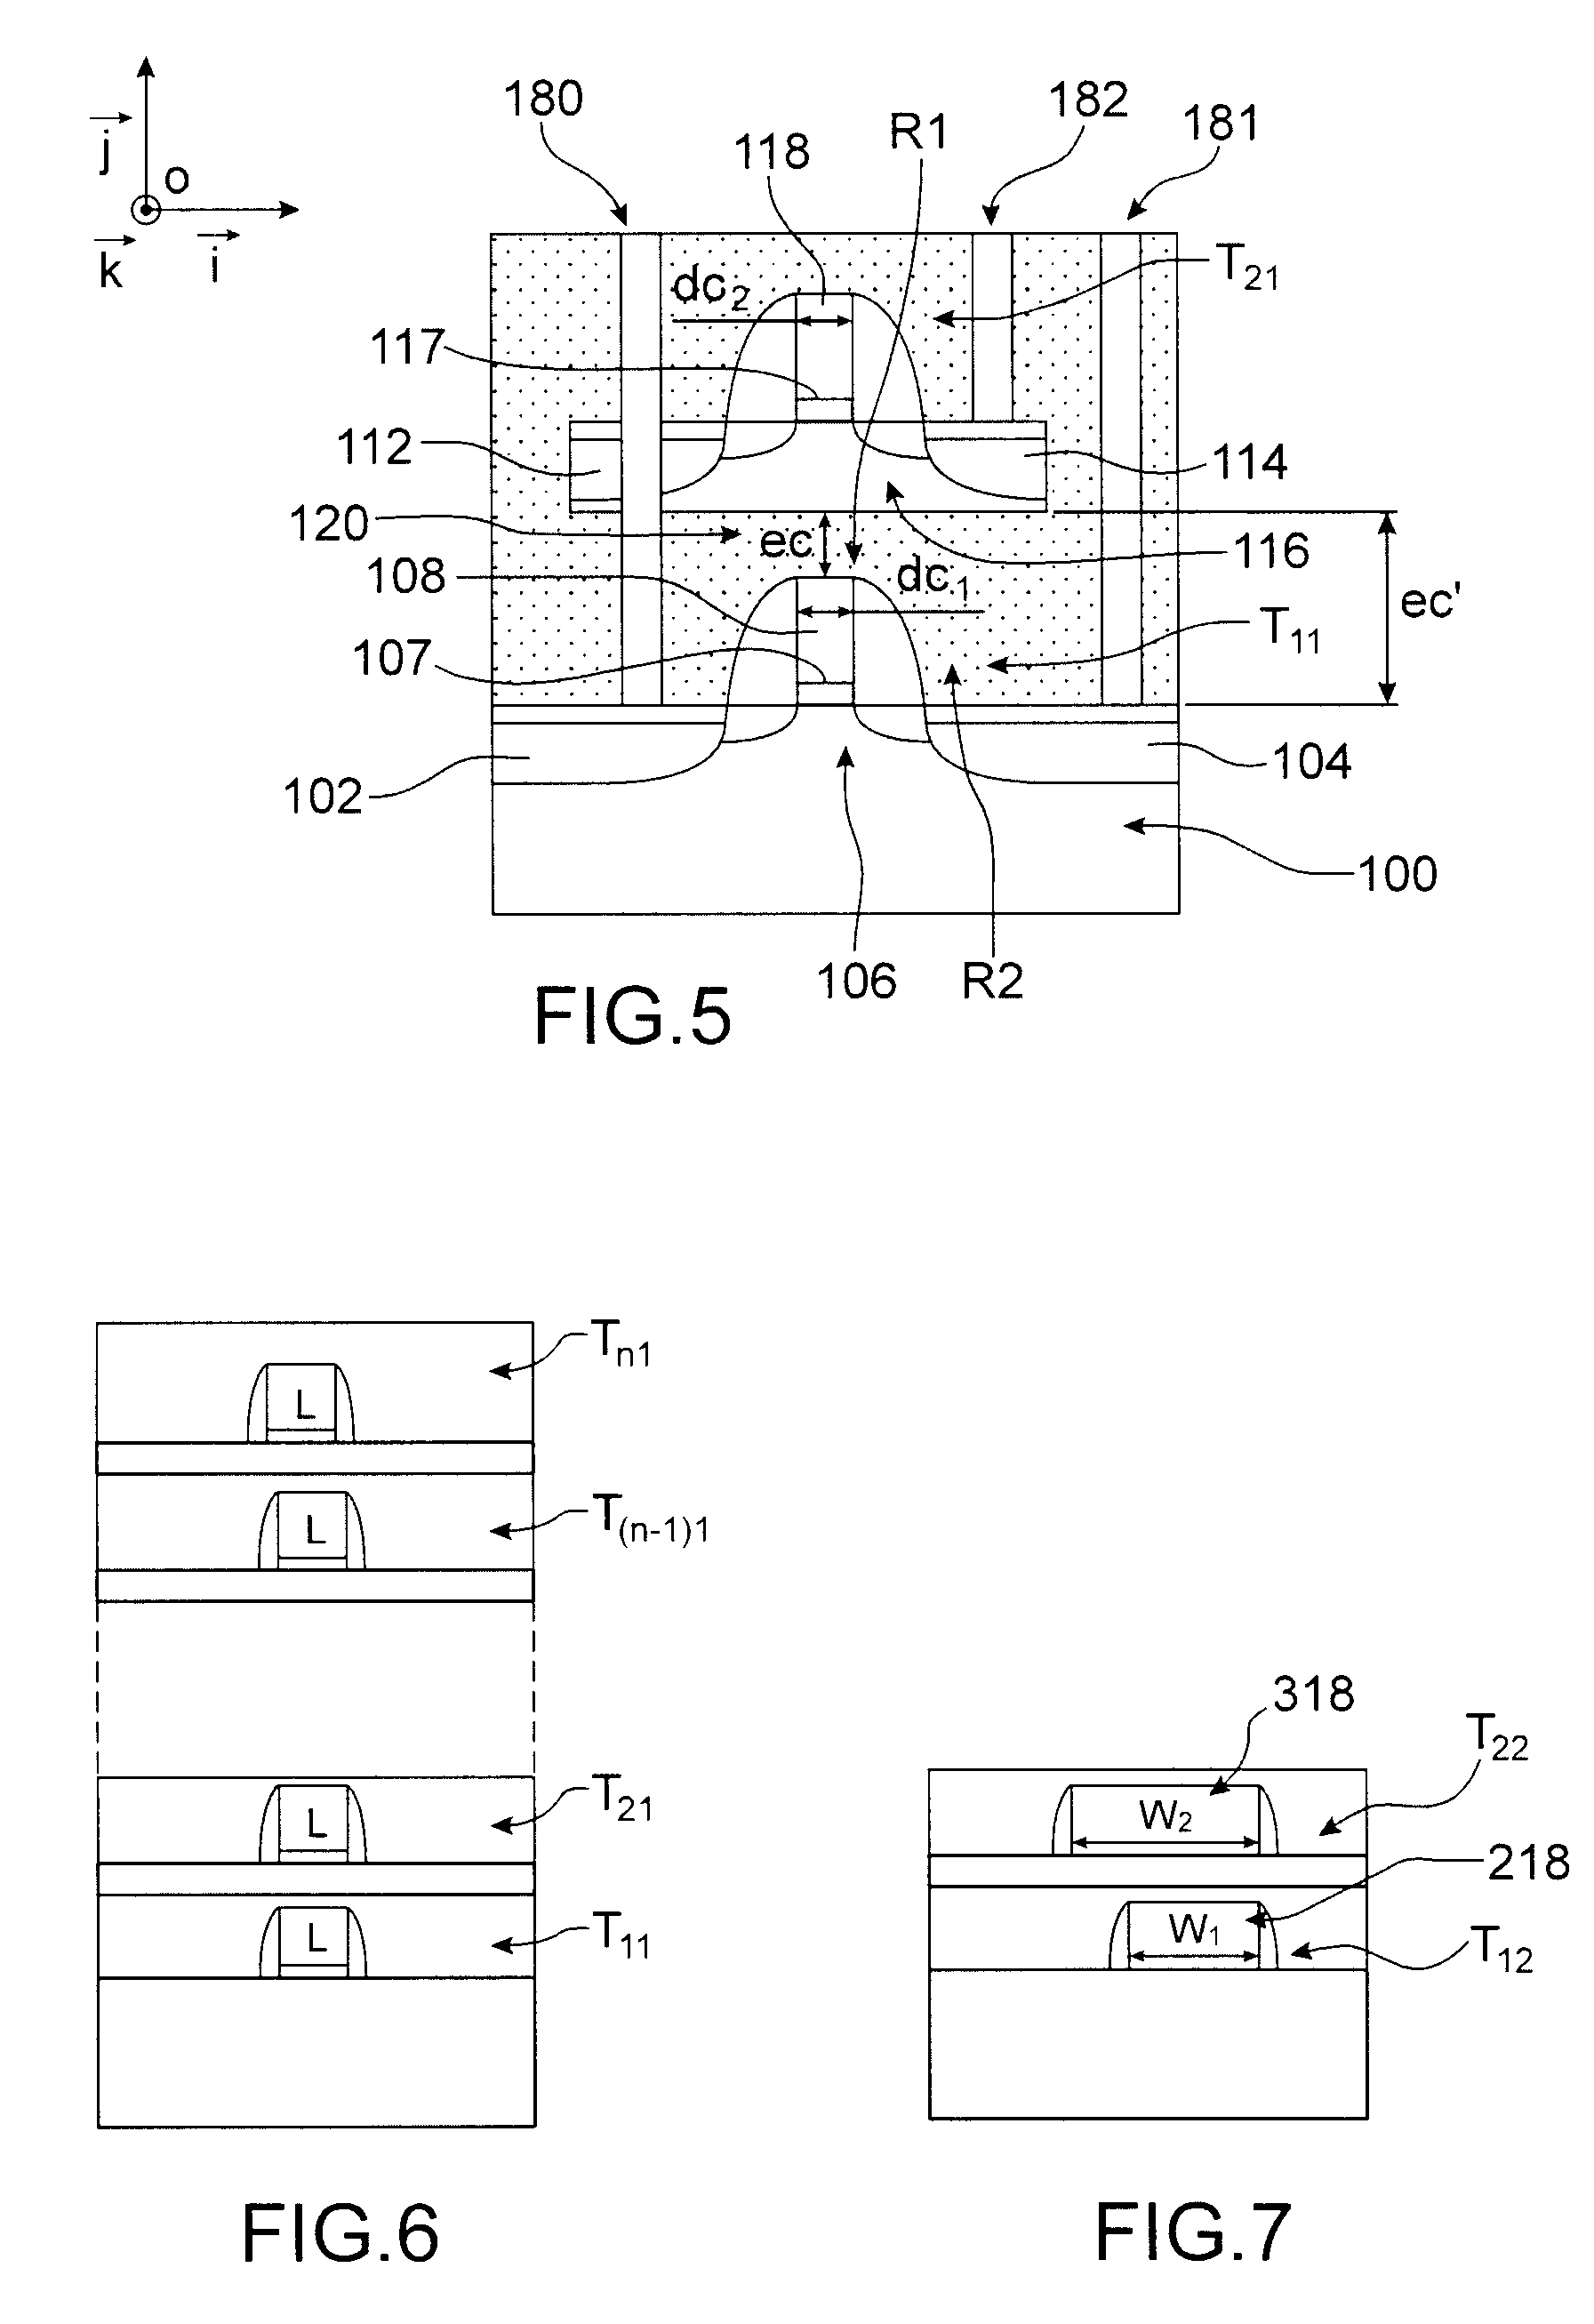 Circuit with transistors integrated in three dimensions and having a dynamically adjustable threshold voltage VT